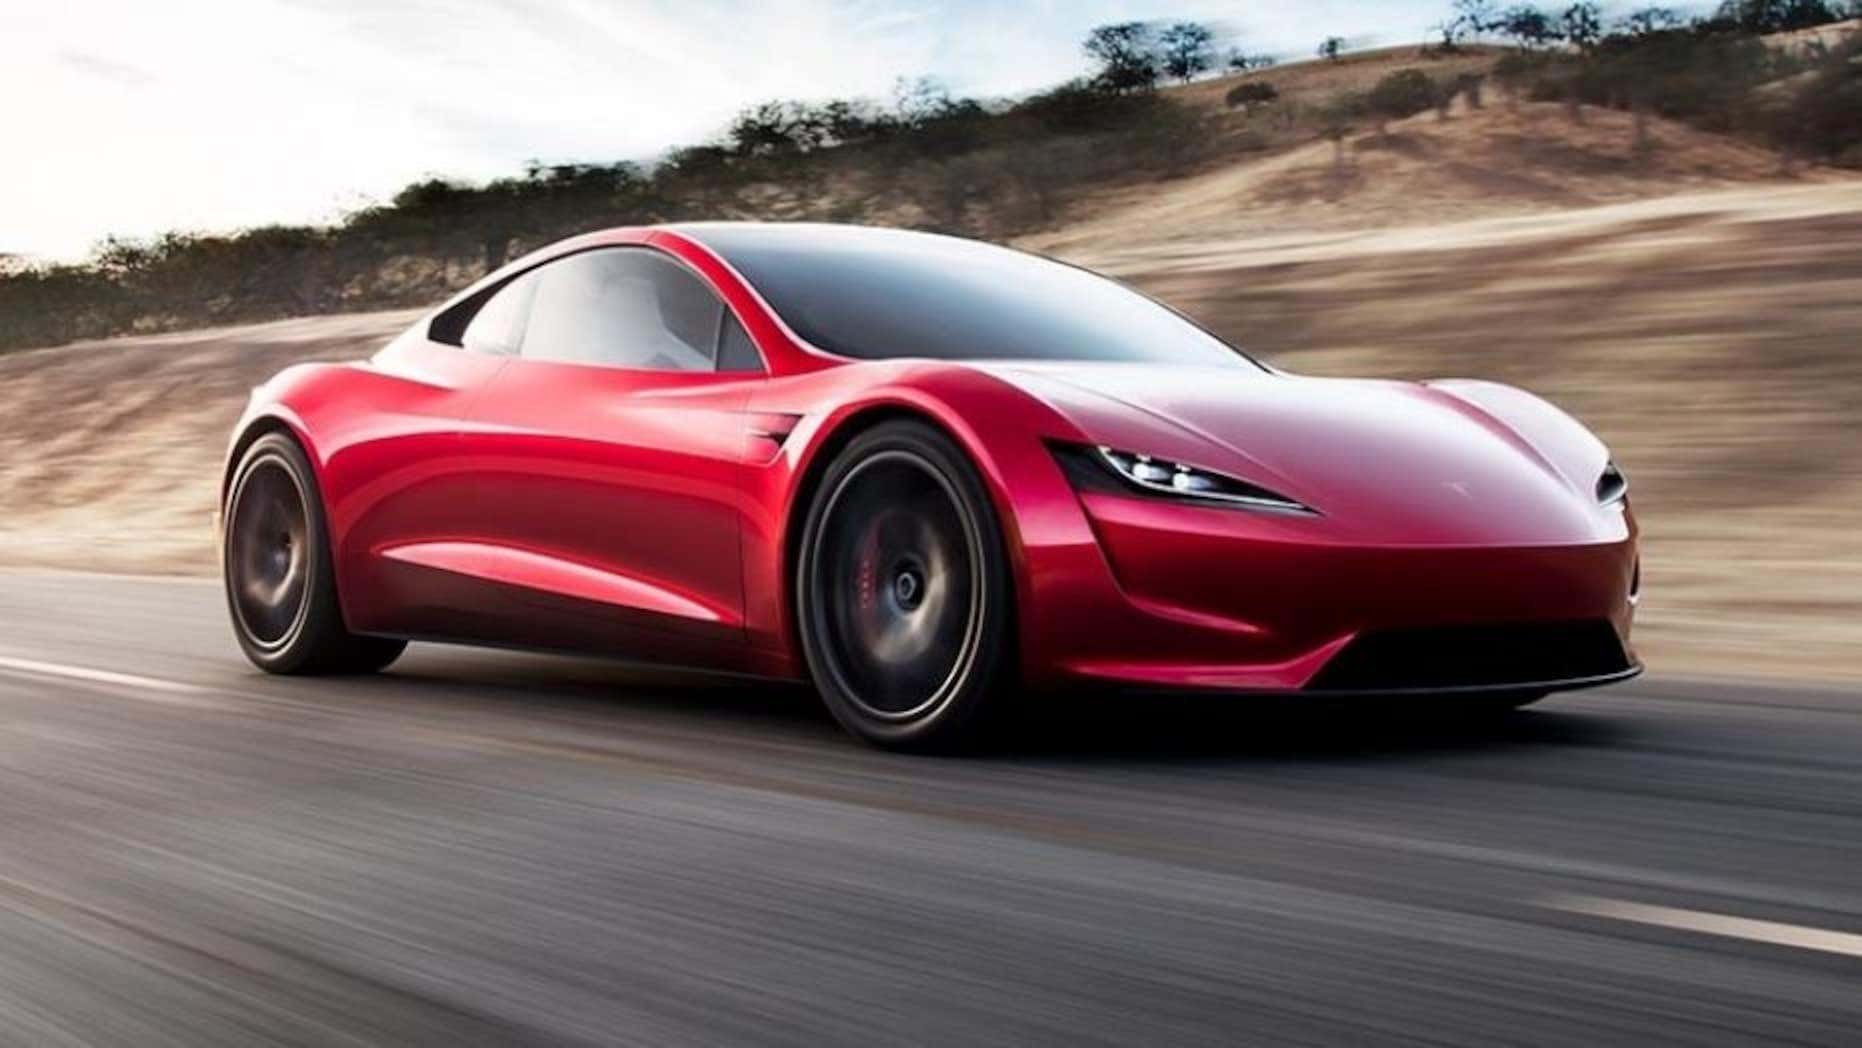 Rocket-powered 'flying' Tesla Roadster too quick for your health?